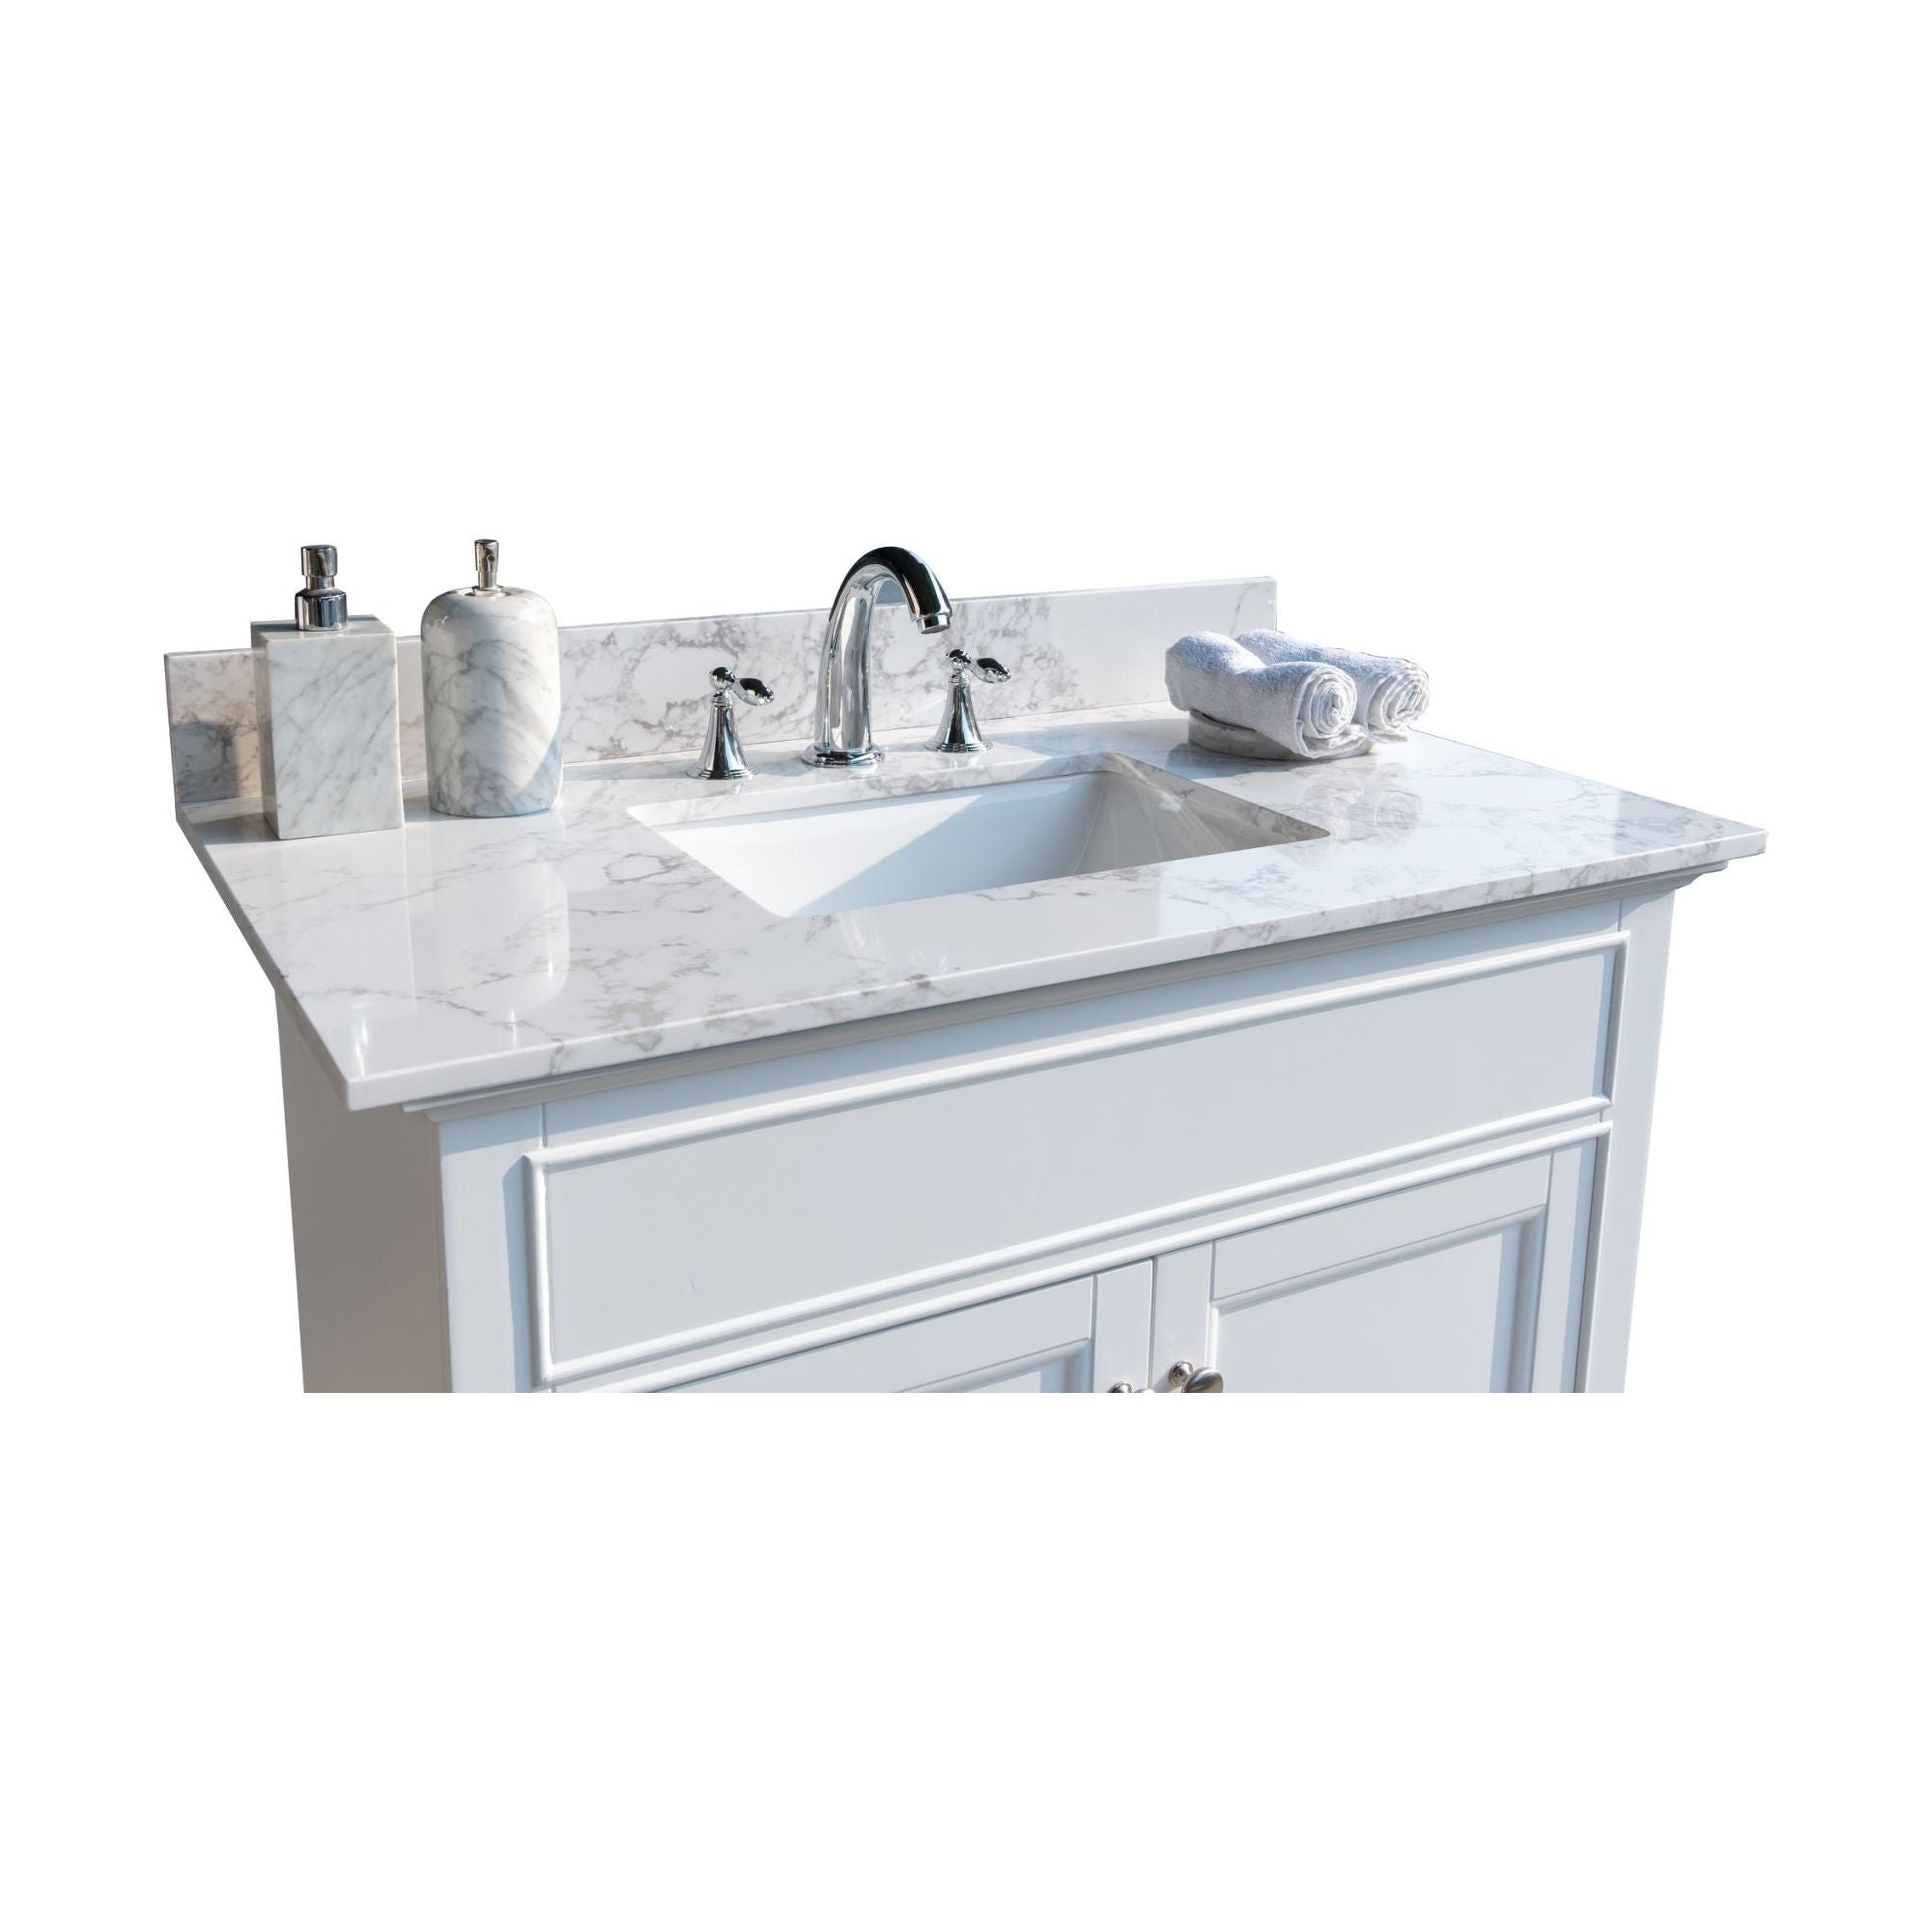 37inch bathroom vanity top stone carrara white new style tops with rectangle undermount ceramic sink and back splash with 3 faucet hole for bathrom cabinet Moorescarts